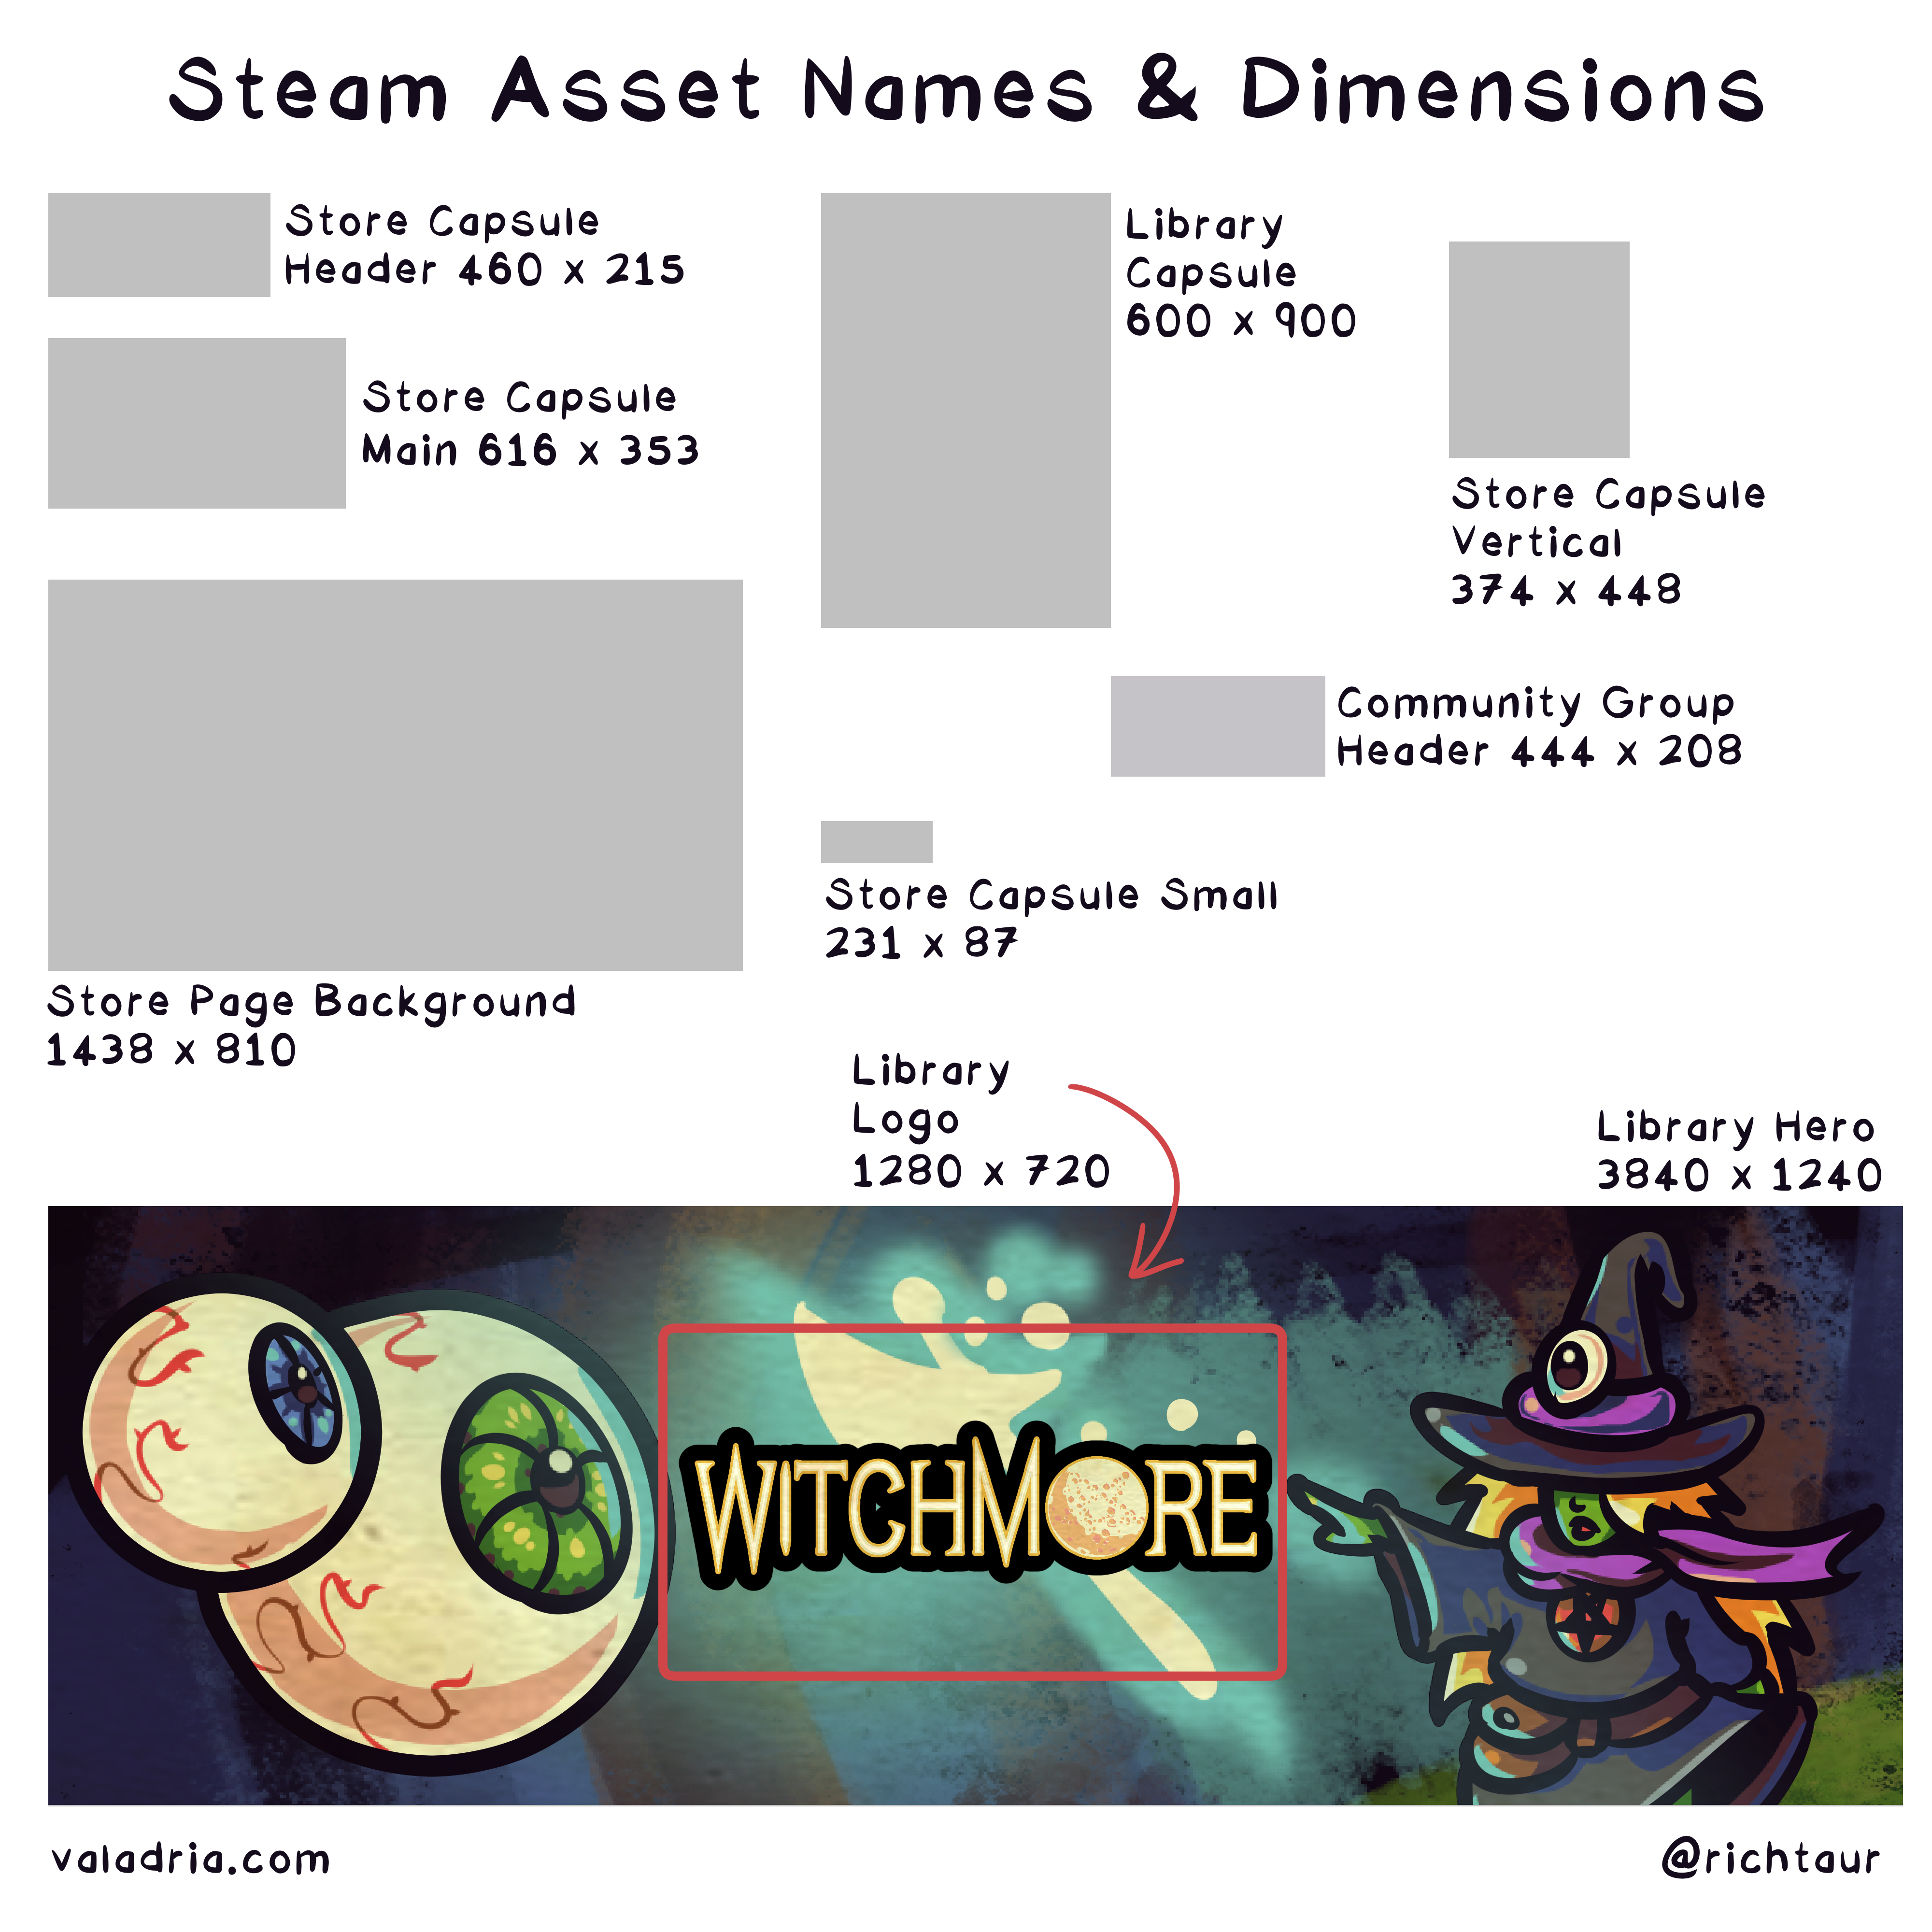 Steam Asset Names & Dimensions  Store Capsule Header 460 x 215 Store Capsule Main 616 x 353 Library Capsule 600 x 900 Store Page Background 1438 x 810 Community Group Header 444 x 208 Store Capsule Vertical 374 x 448 Store Capsule Small 231 x 87 Library Hero 3840 x 1240 Library Logo 1280 x 720  valadria.com @richtaur